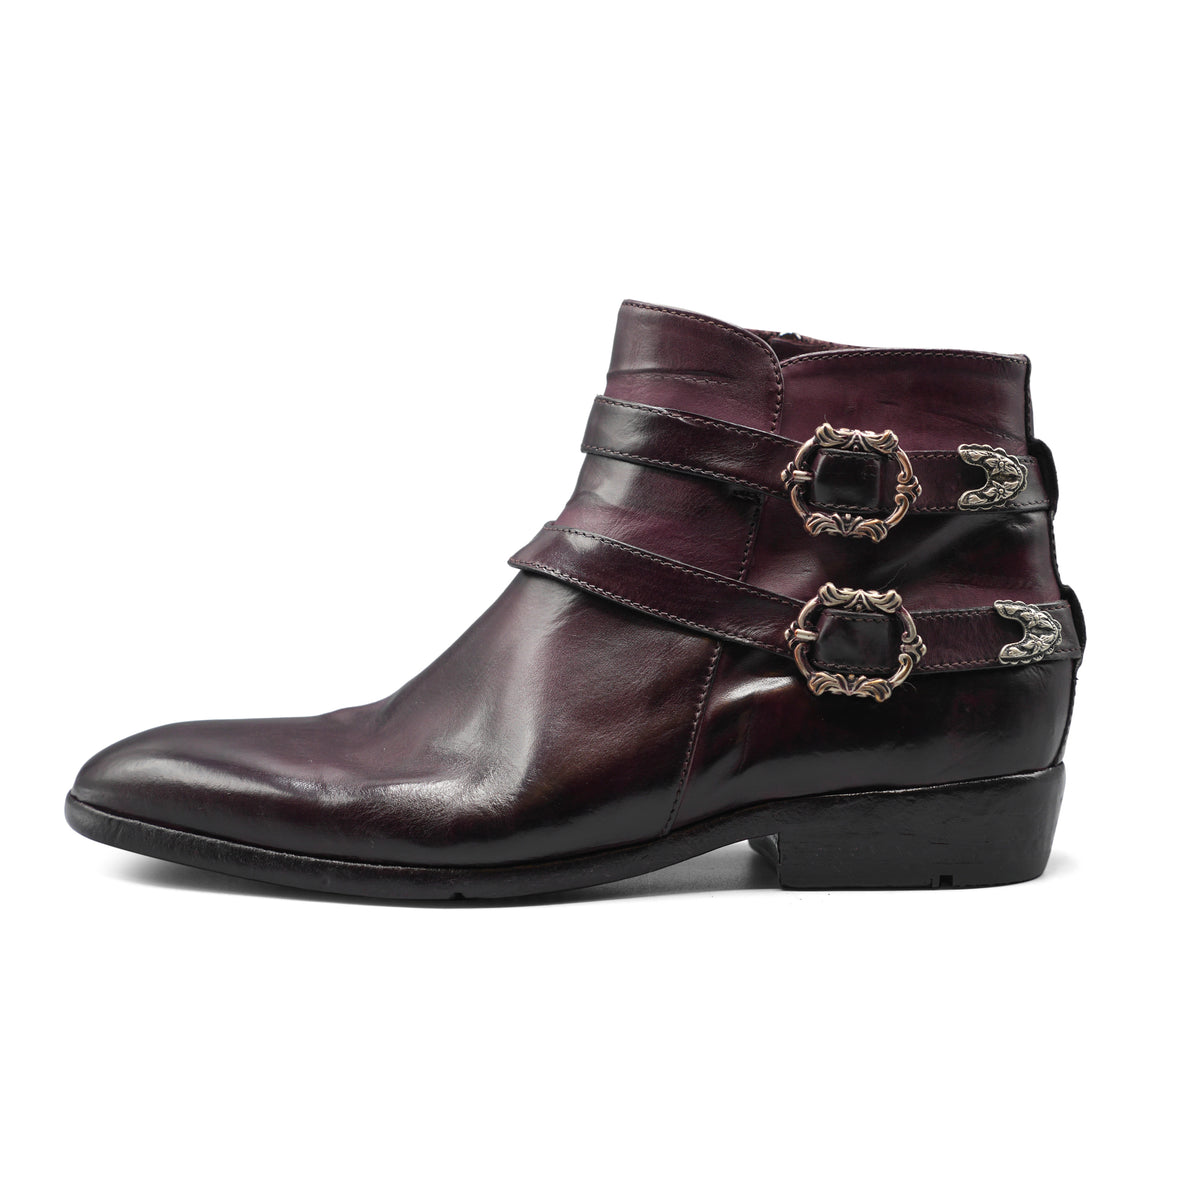 FLOR3B - Burgundy Double Strap Ankle Boot